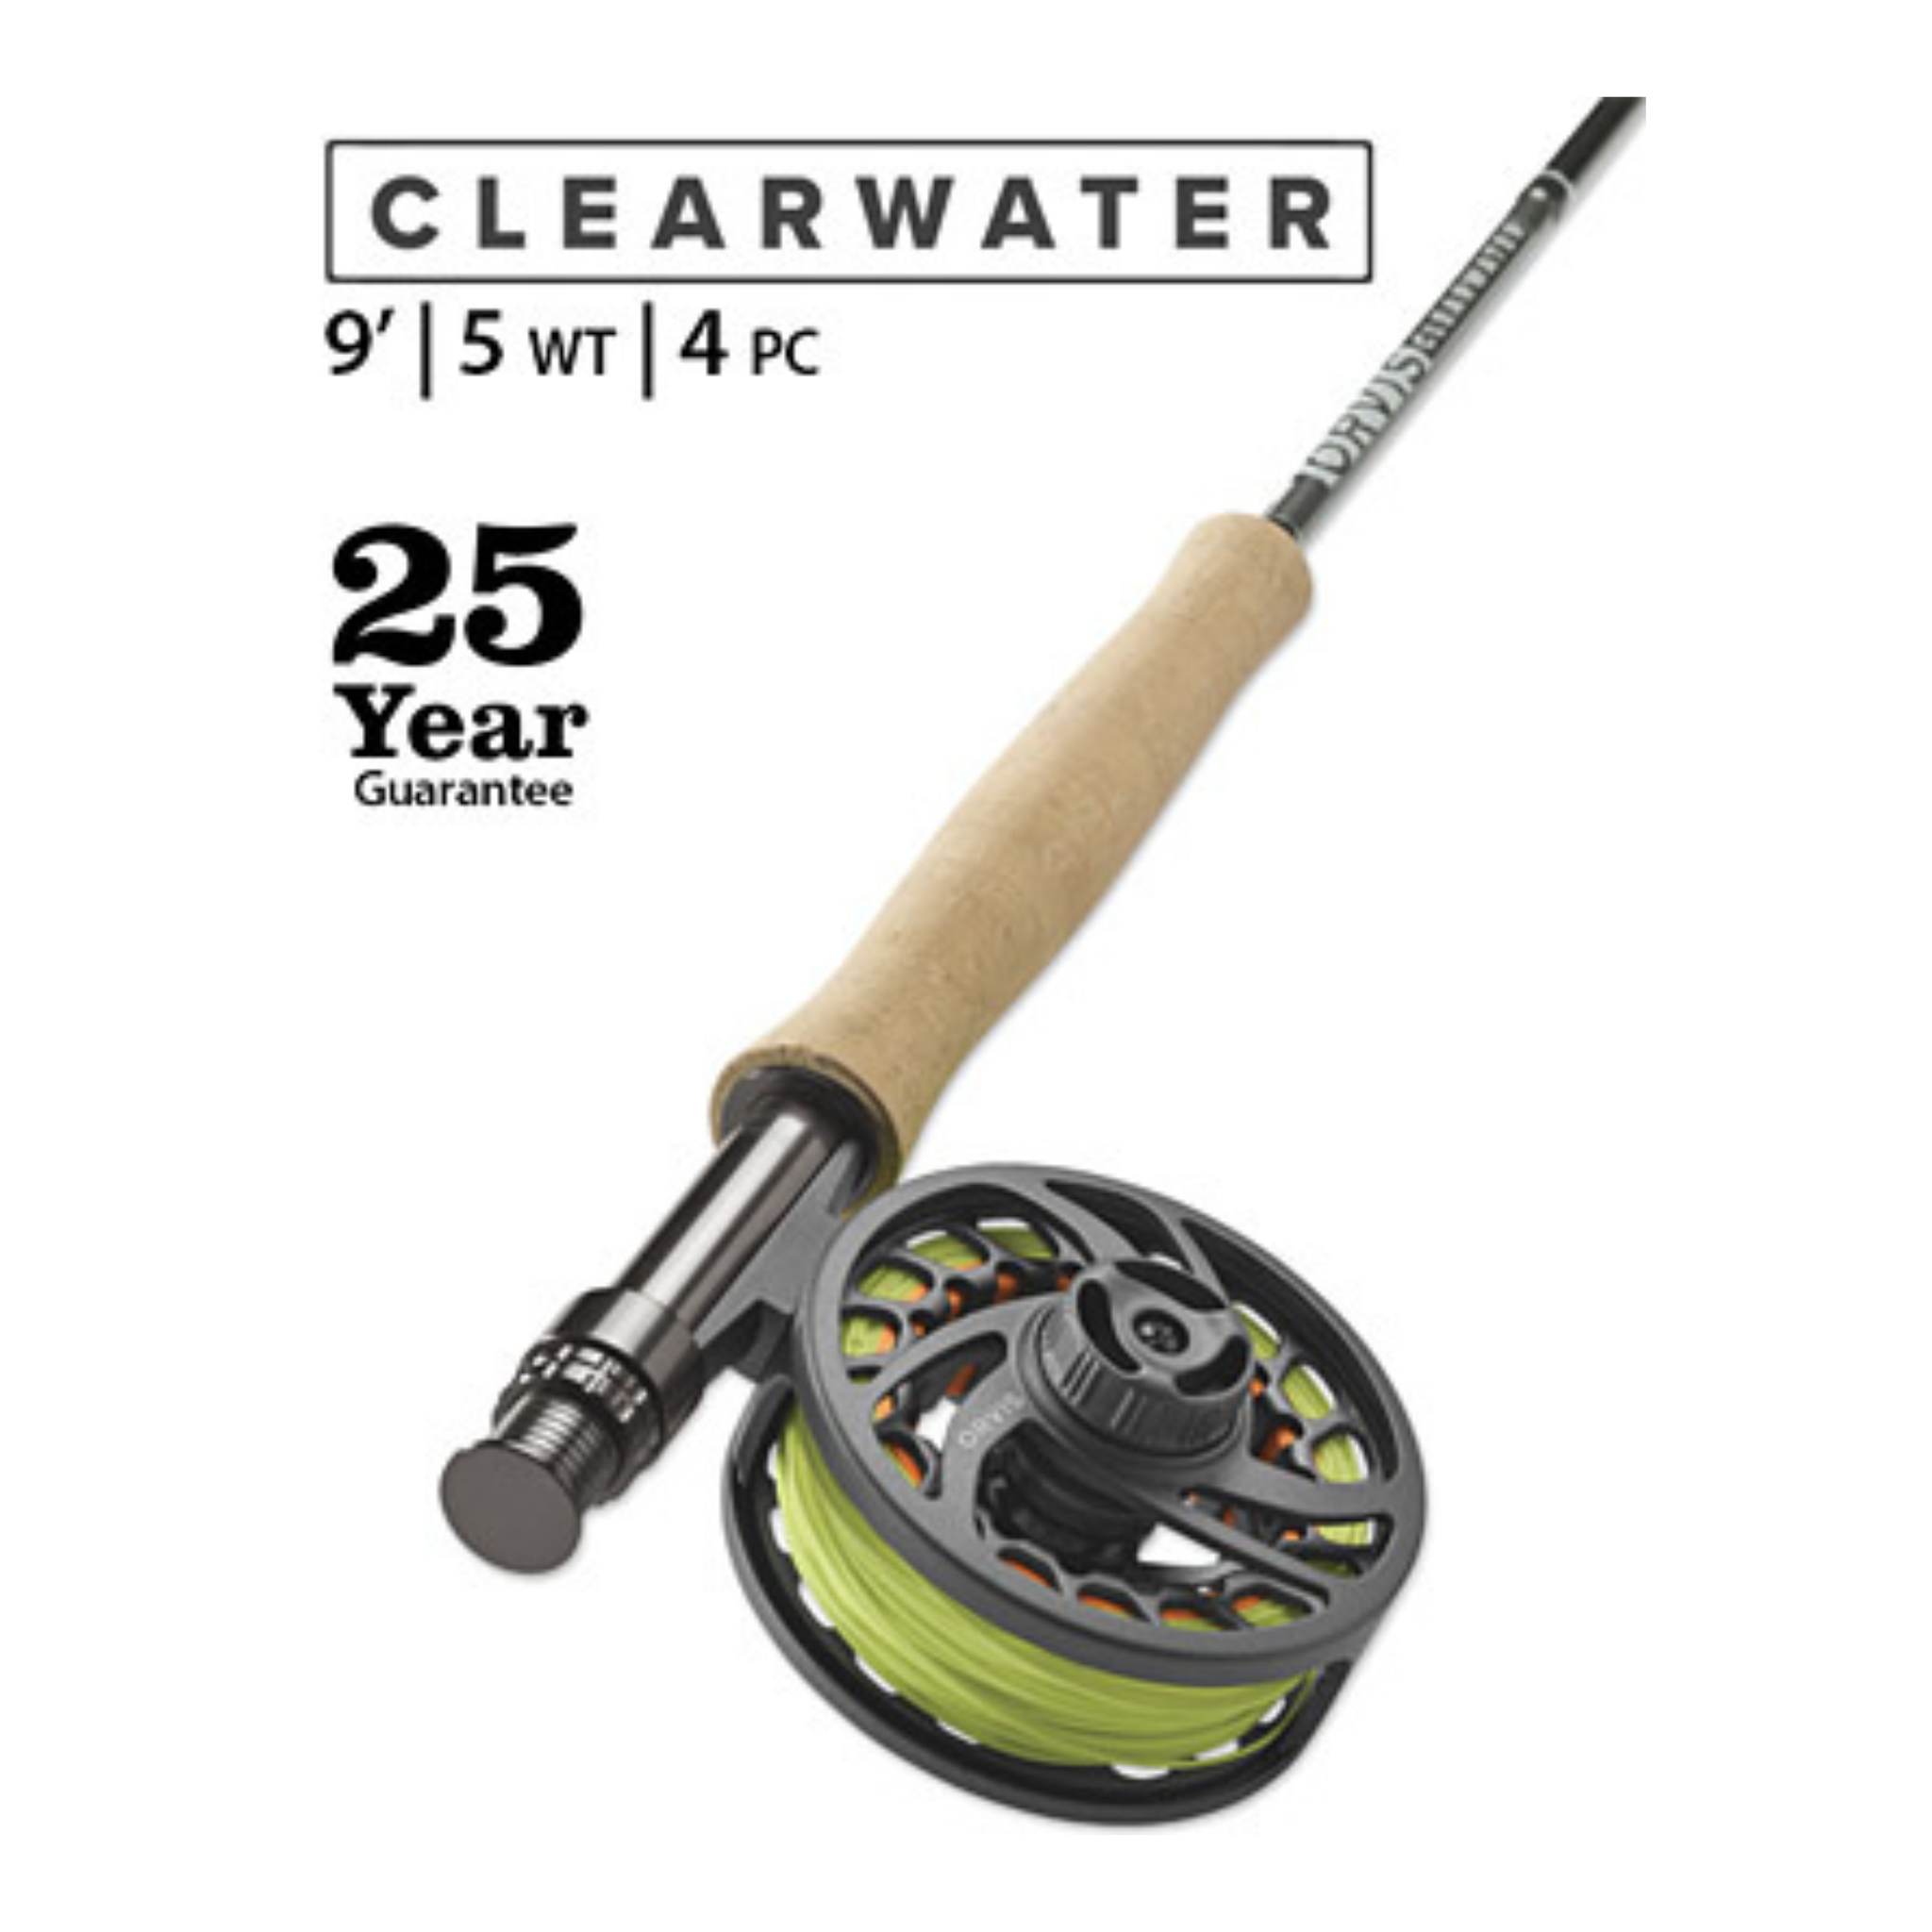 Clearwater Rod & Reel Outfit